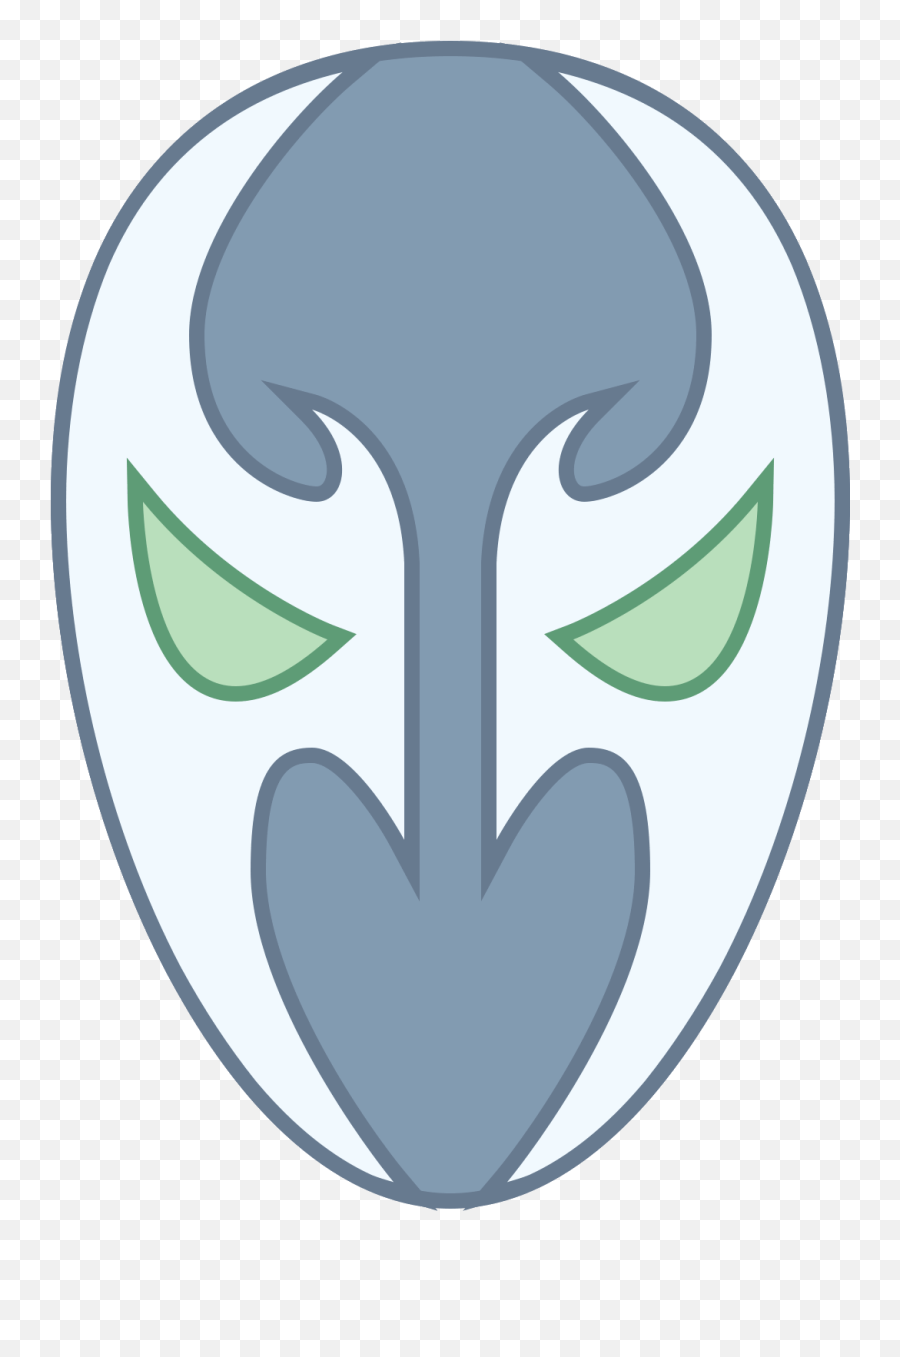 Download Hd Png 50 Px - Spawn Icon Transparent Png Image Spawn Rosto,Spawn Png